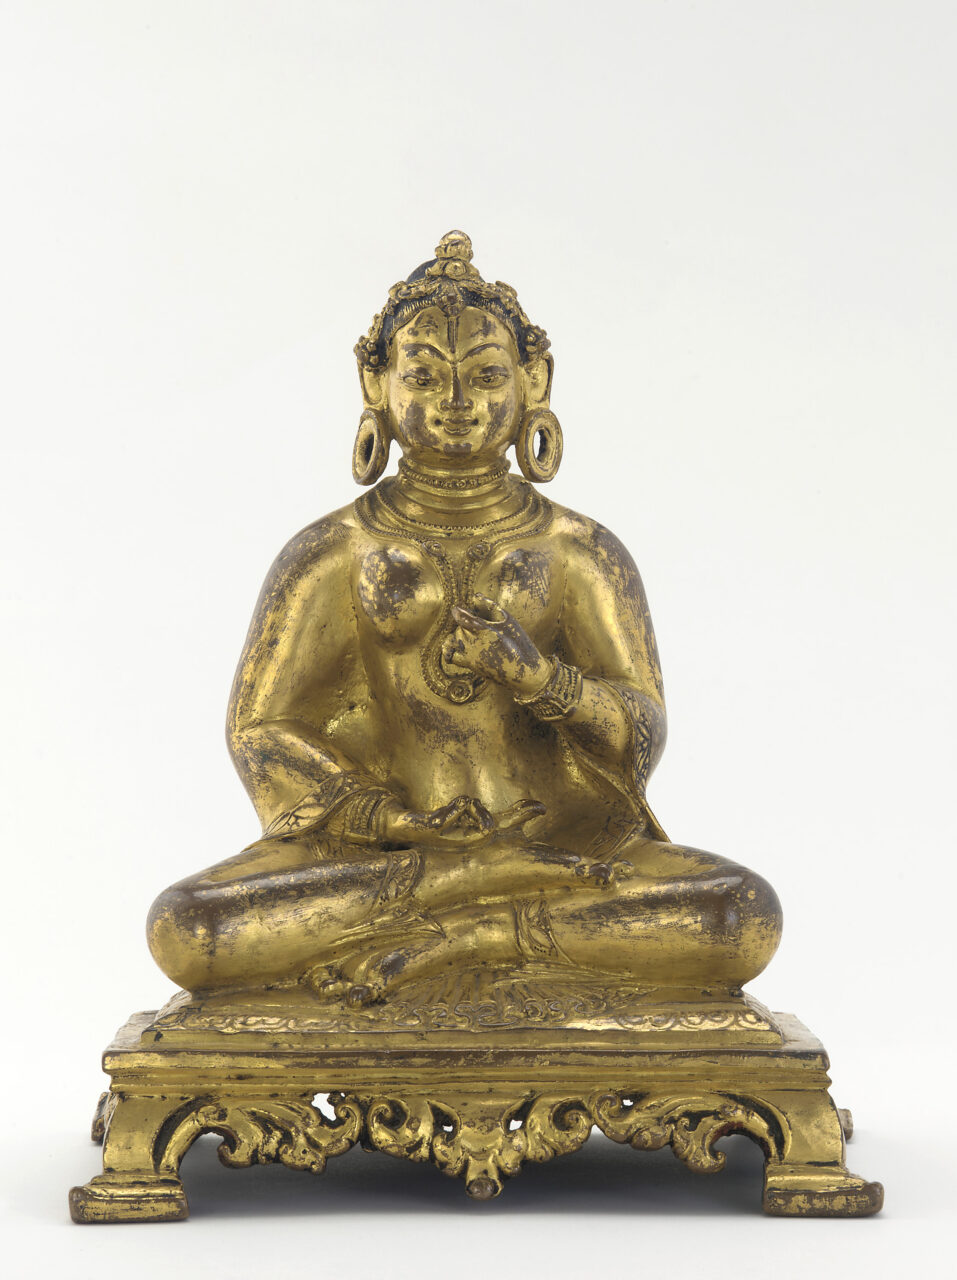 Gilded statuette depicting queen wearing diadem, hoop earrings, and thick necklaces; hands posed in mudras